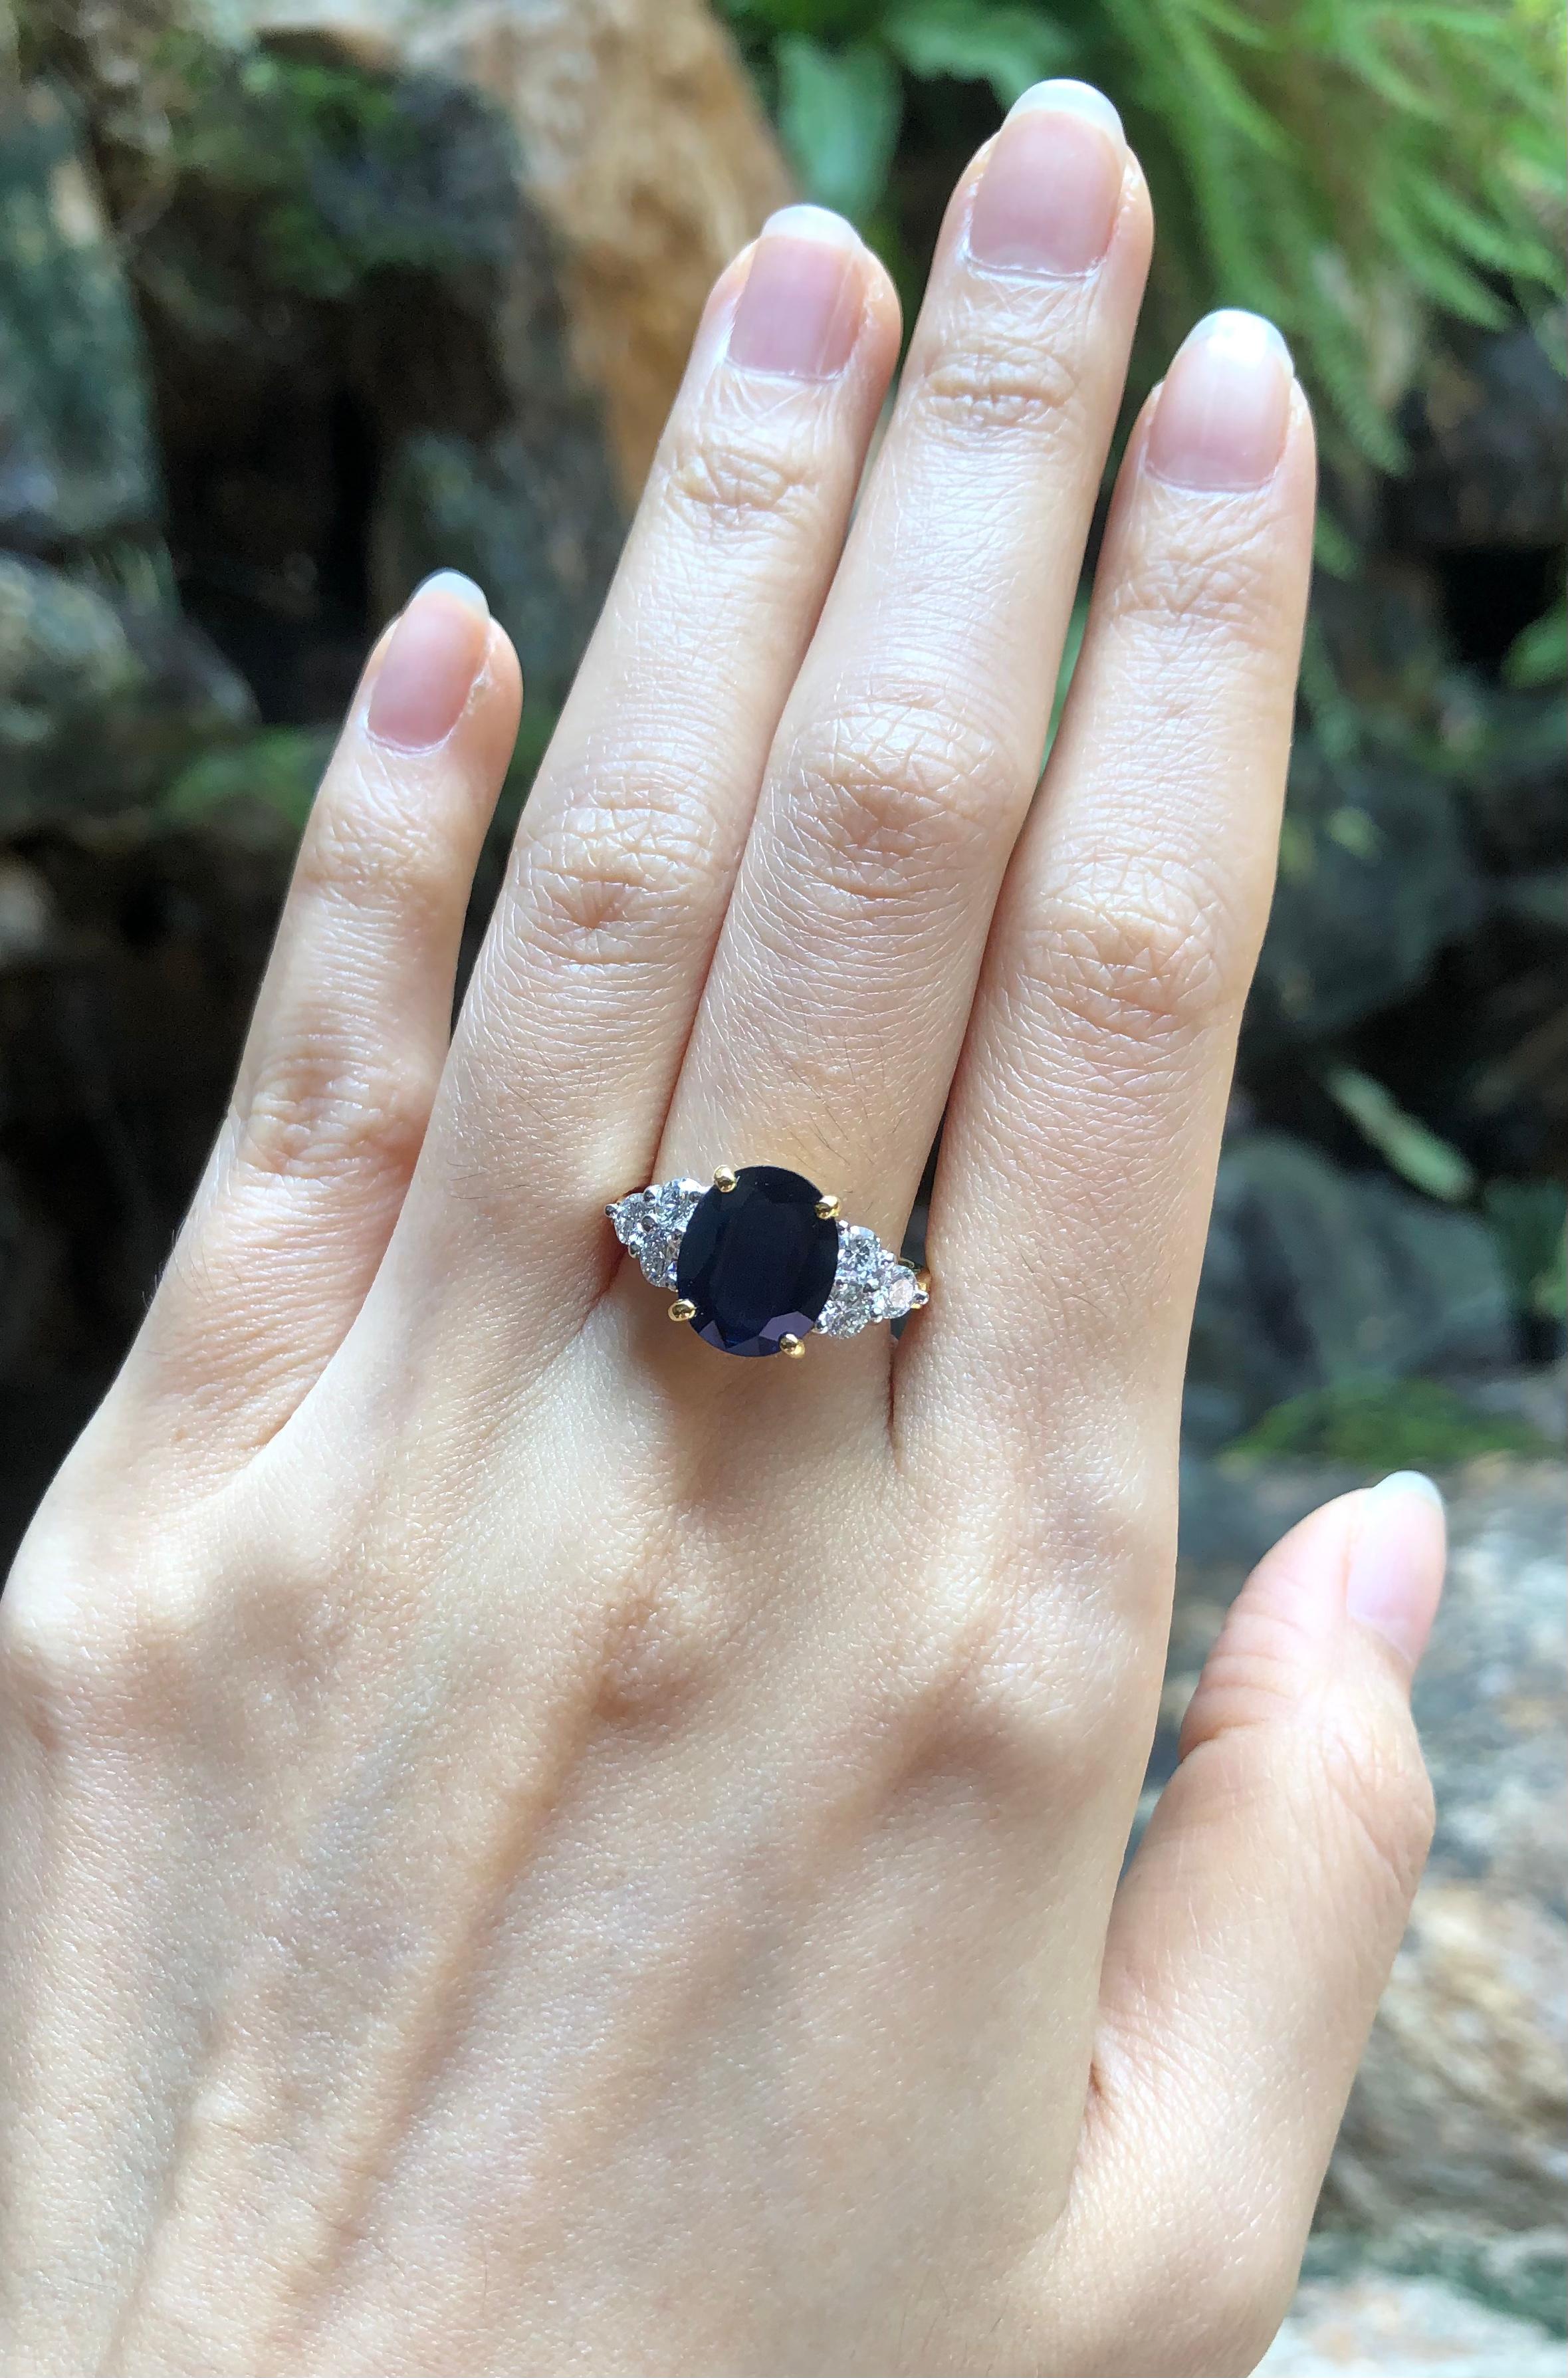 Women's Blue Sapphire with Diamond Ring Set in 18 Karat Gold Settings For Sale